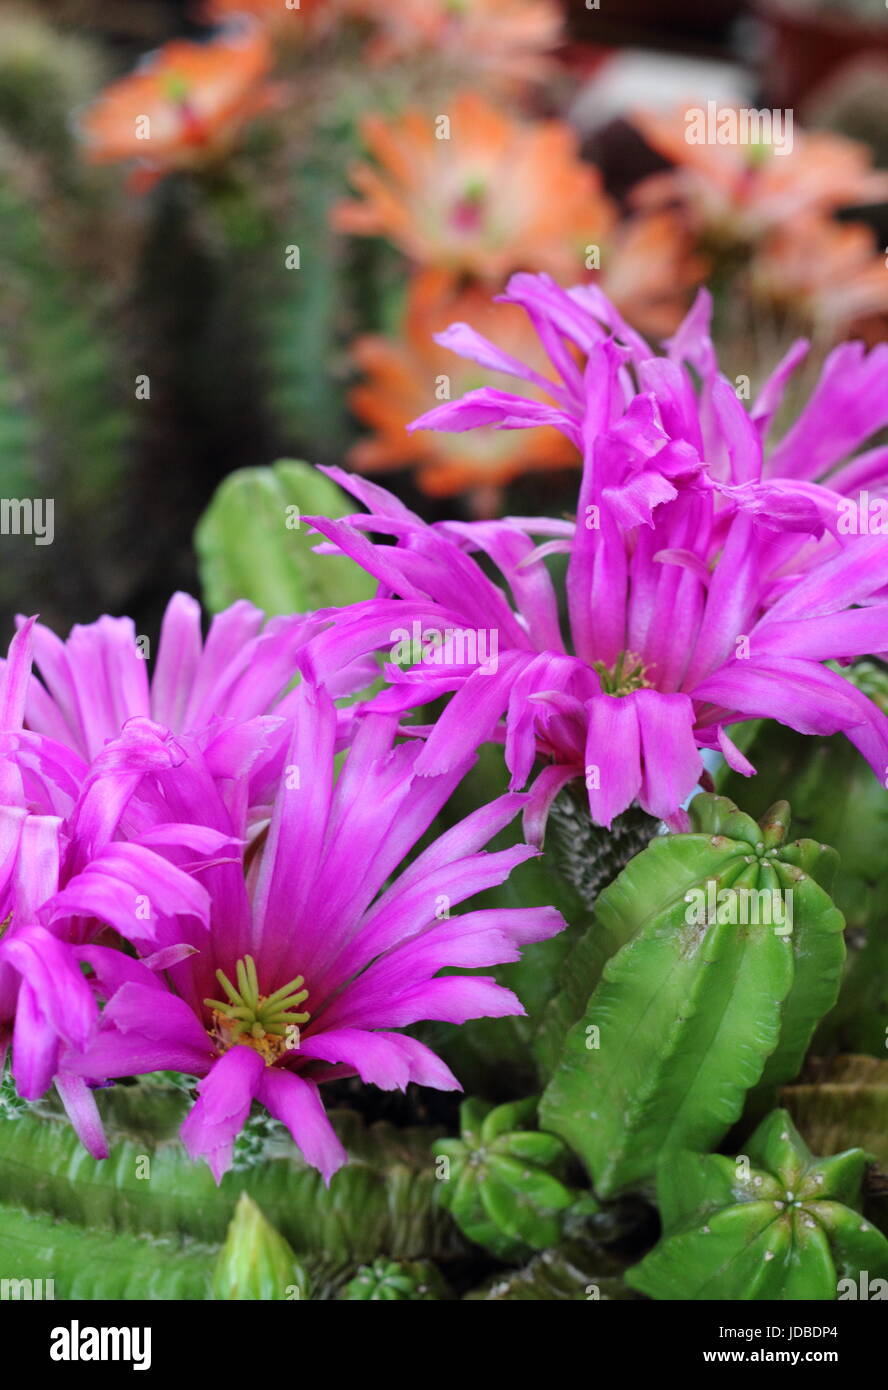 Houseplant cactus with pink flowers in full bloom in June, UK Stock Photo